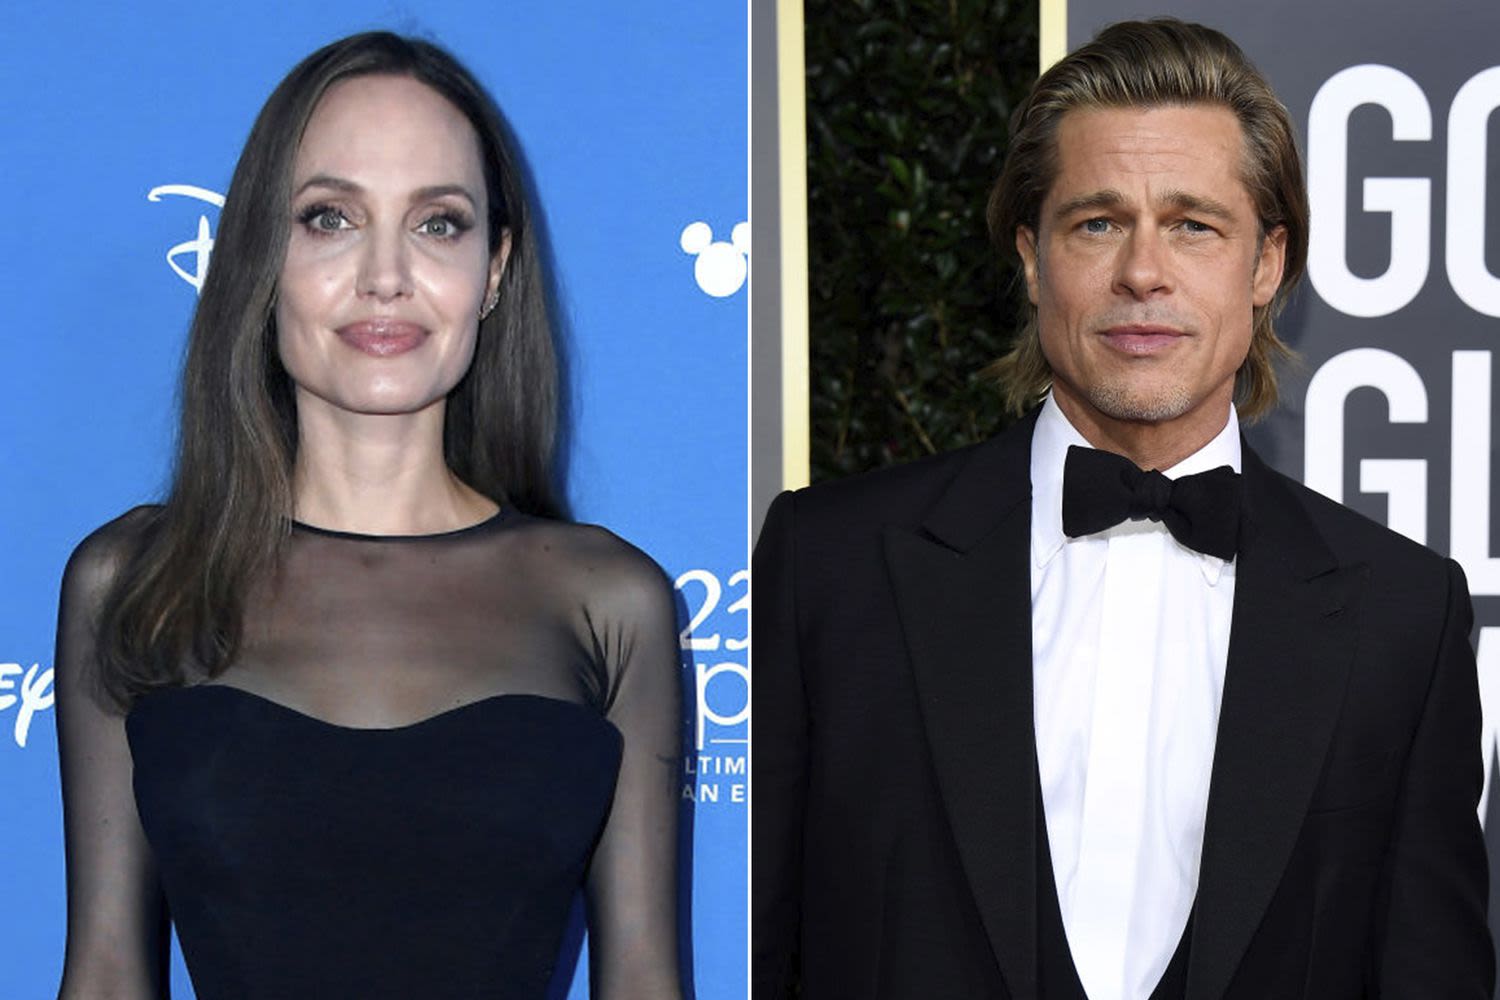 Brad Pitt Slams Angelina Jolie's 'Intrusive' Request to Disclose His Messages About Plane Incident Aftermath